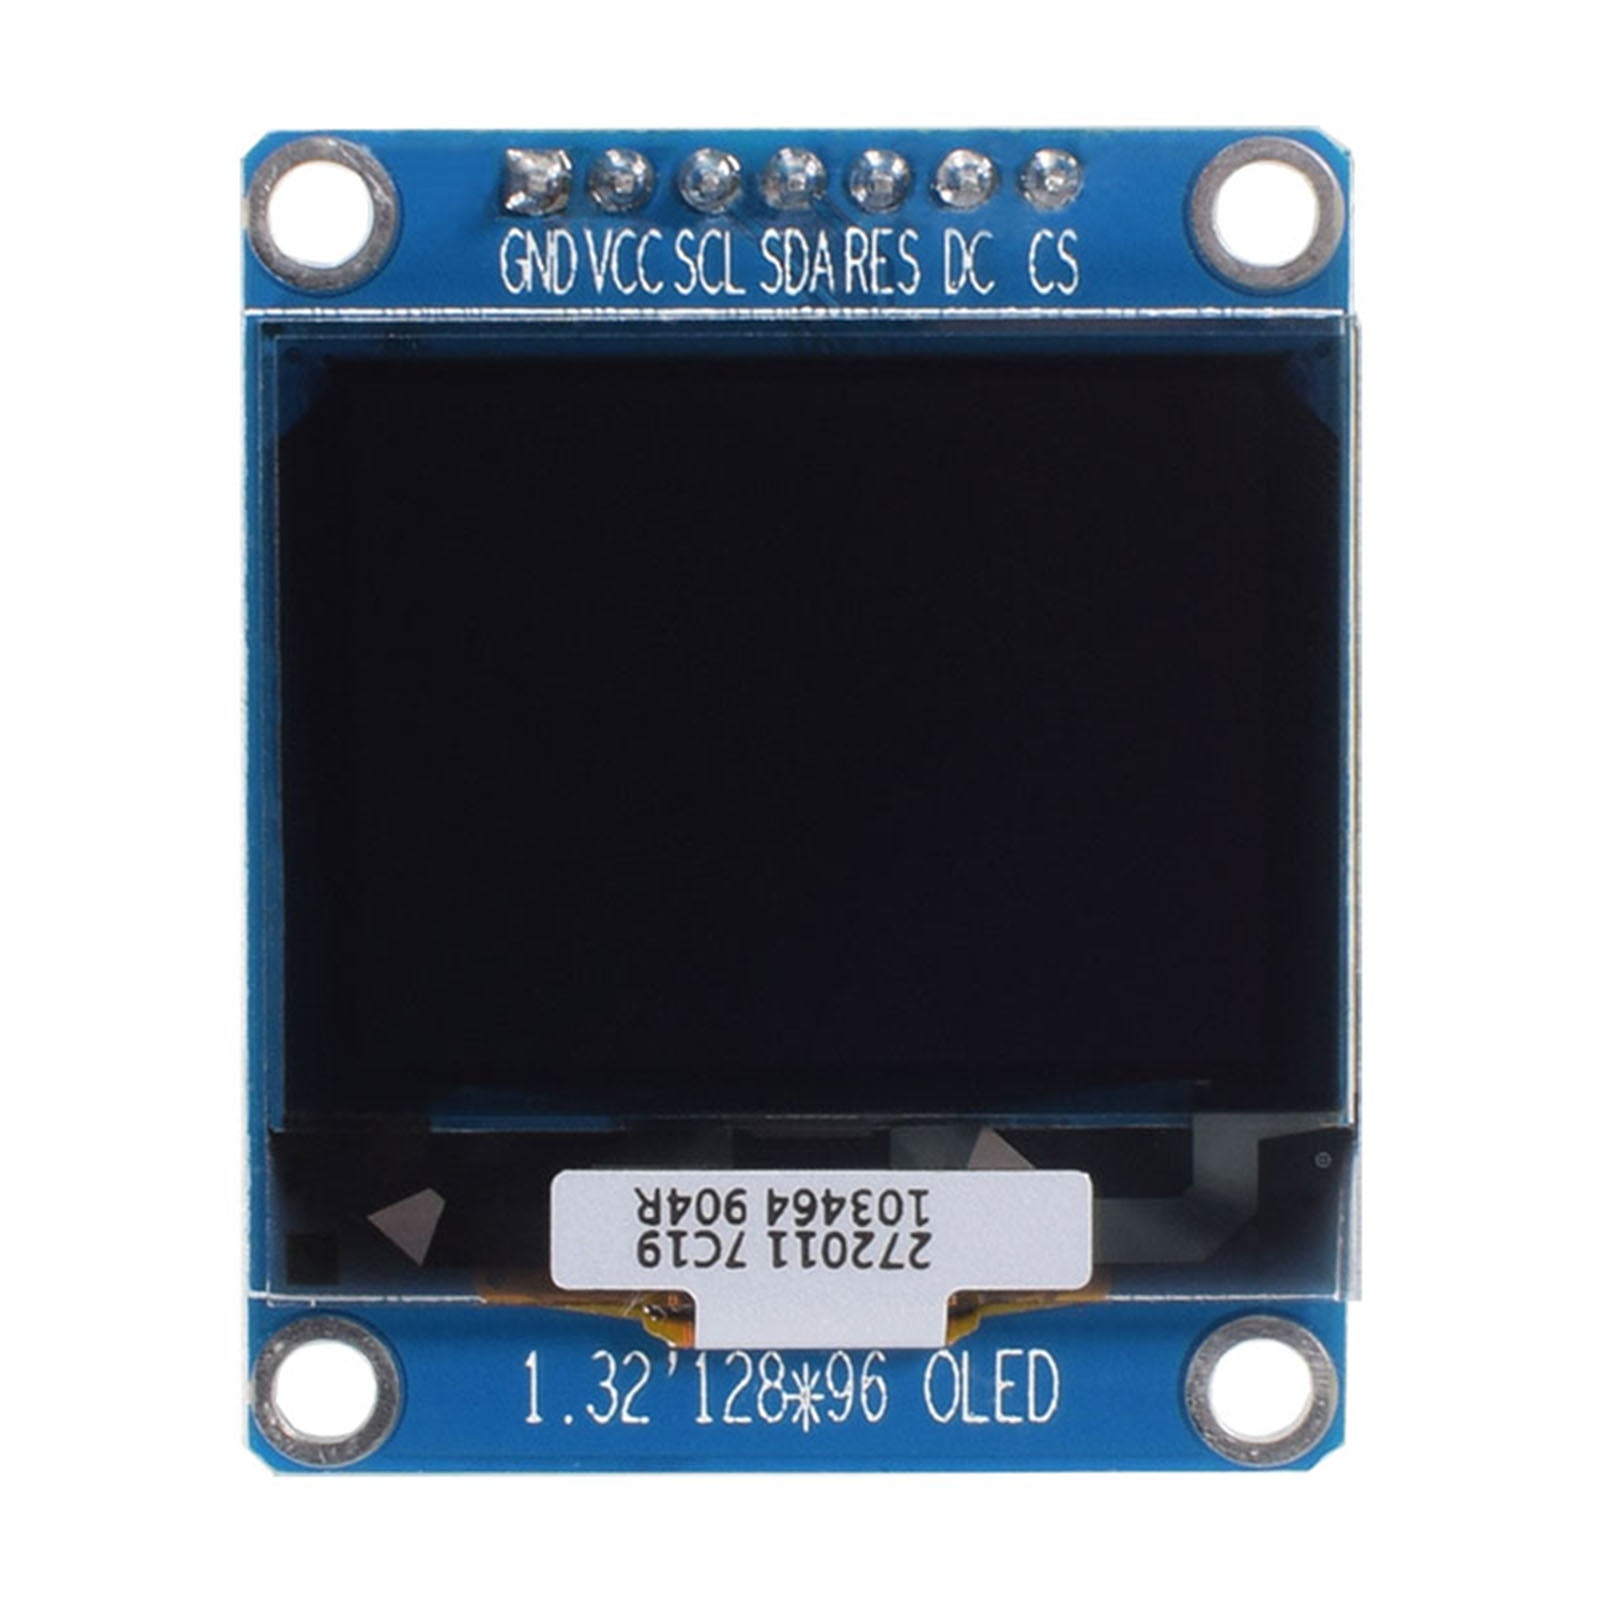 1.32-inch OLED Graphic Display Module with 128x96 resolution and SPI interface